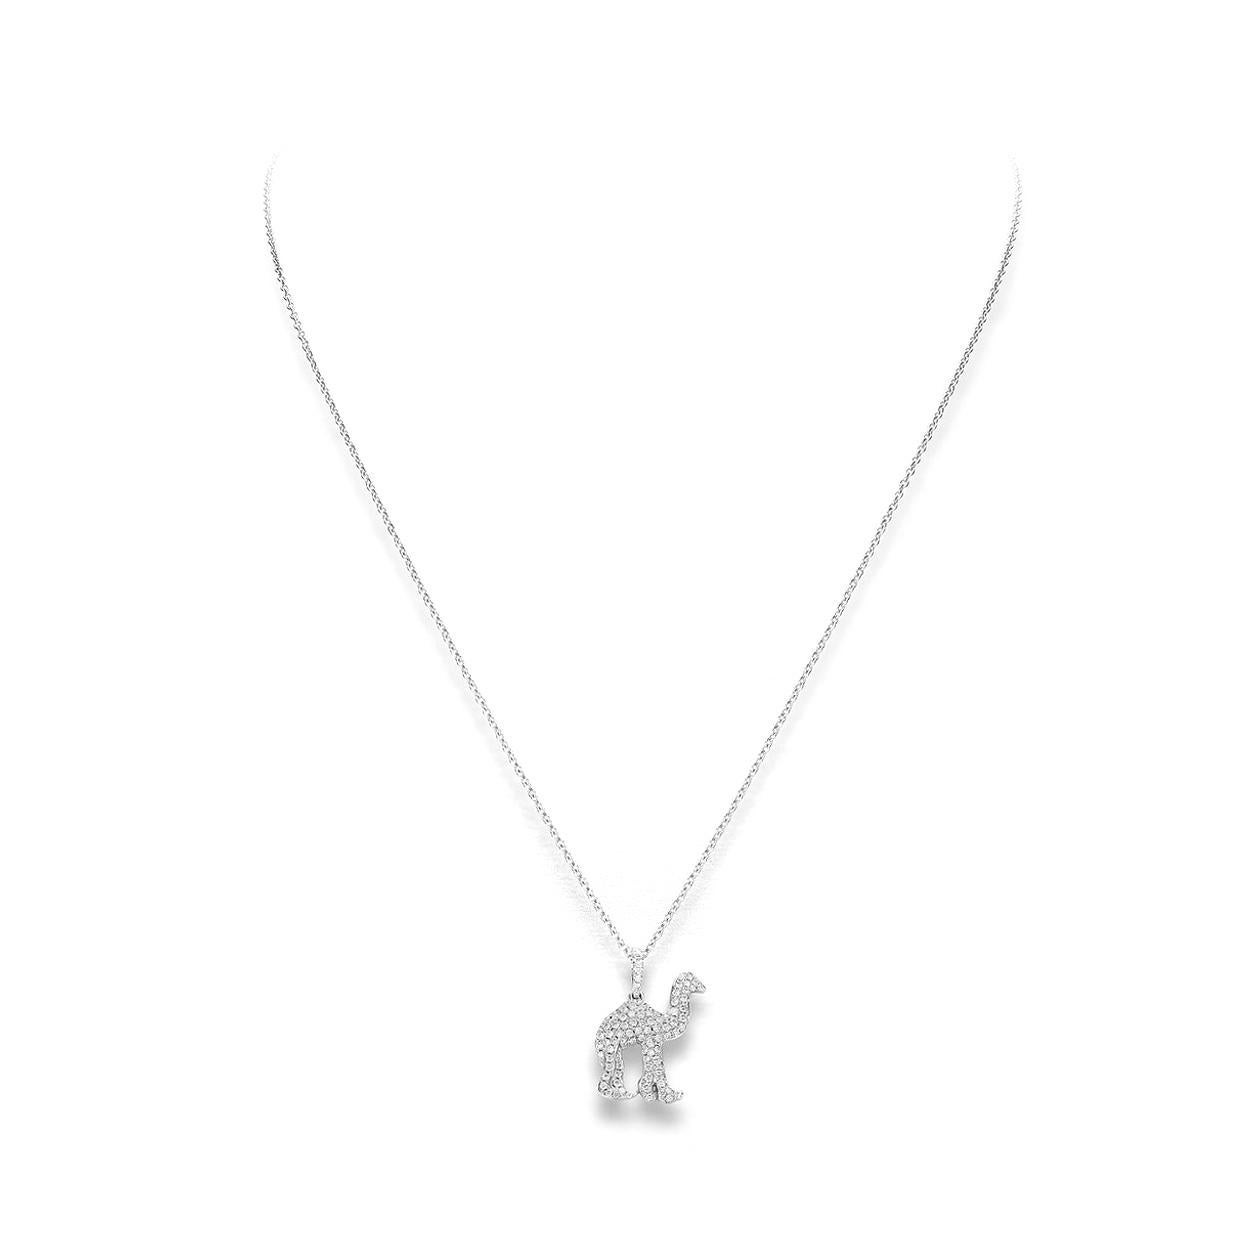 Camel pendant in 18kt white gold set with 93 diamonds 0.31 cts